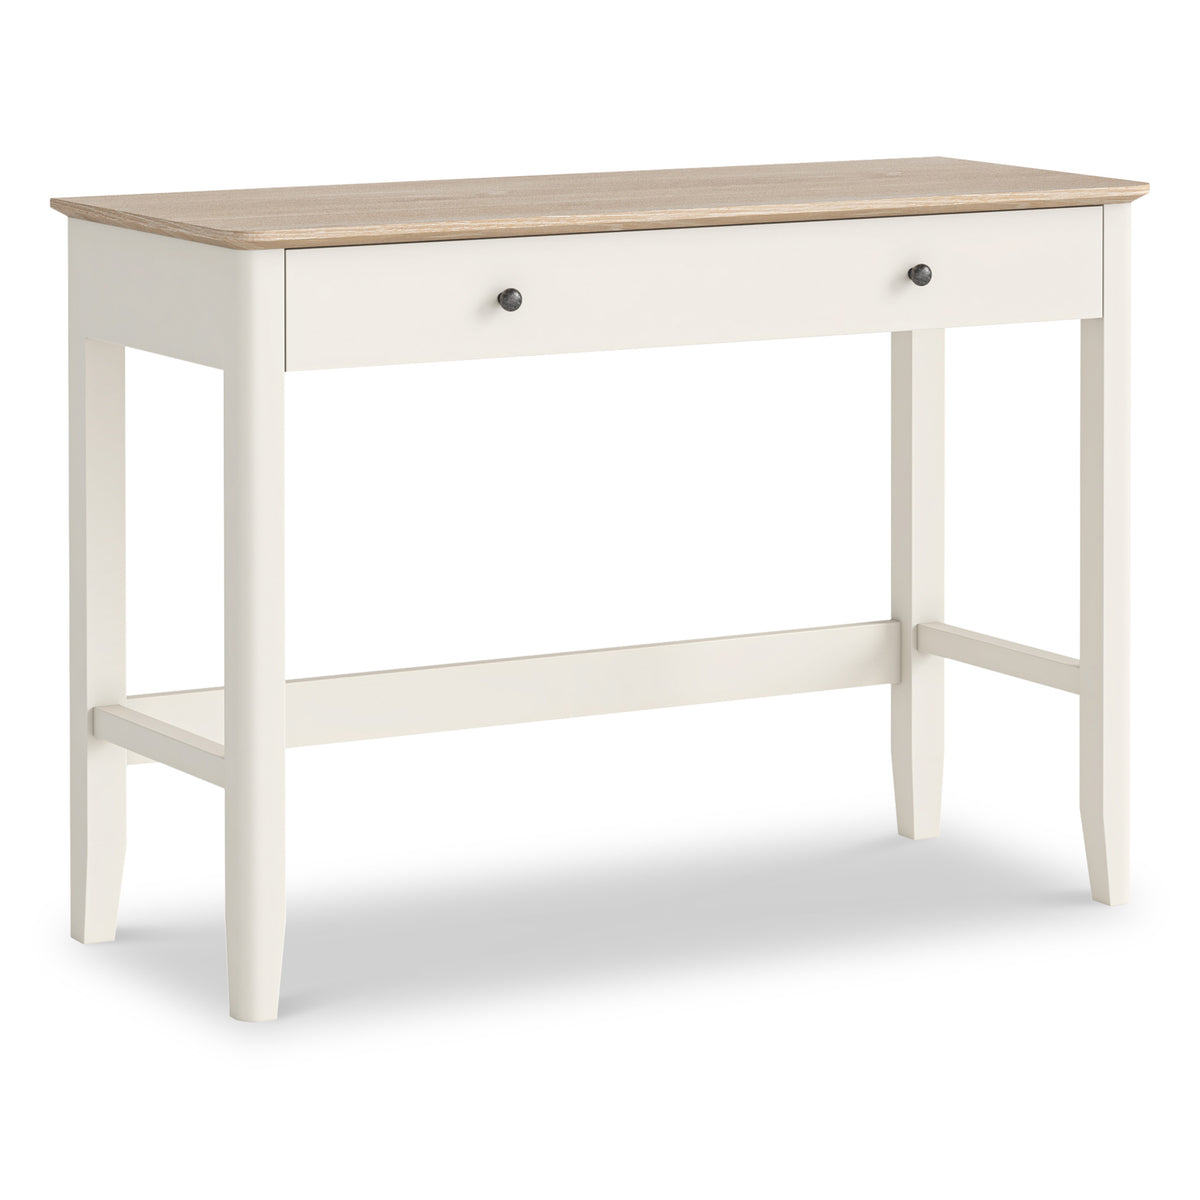 Penrose Coconut White Home Office Desk with metal handles from Roseland Furniture